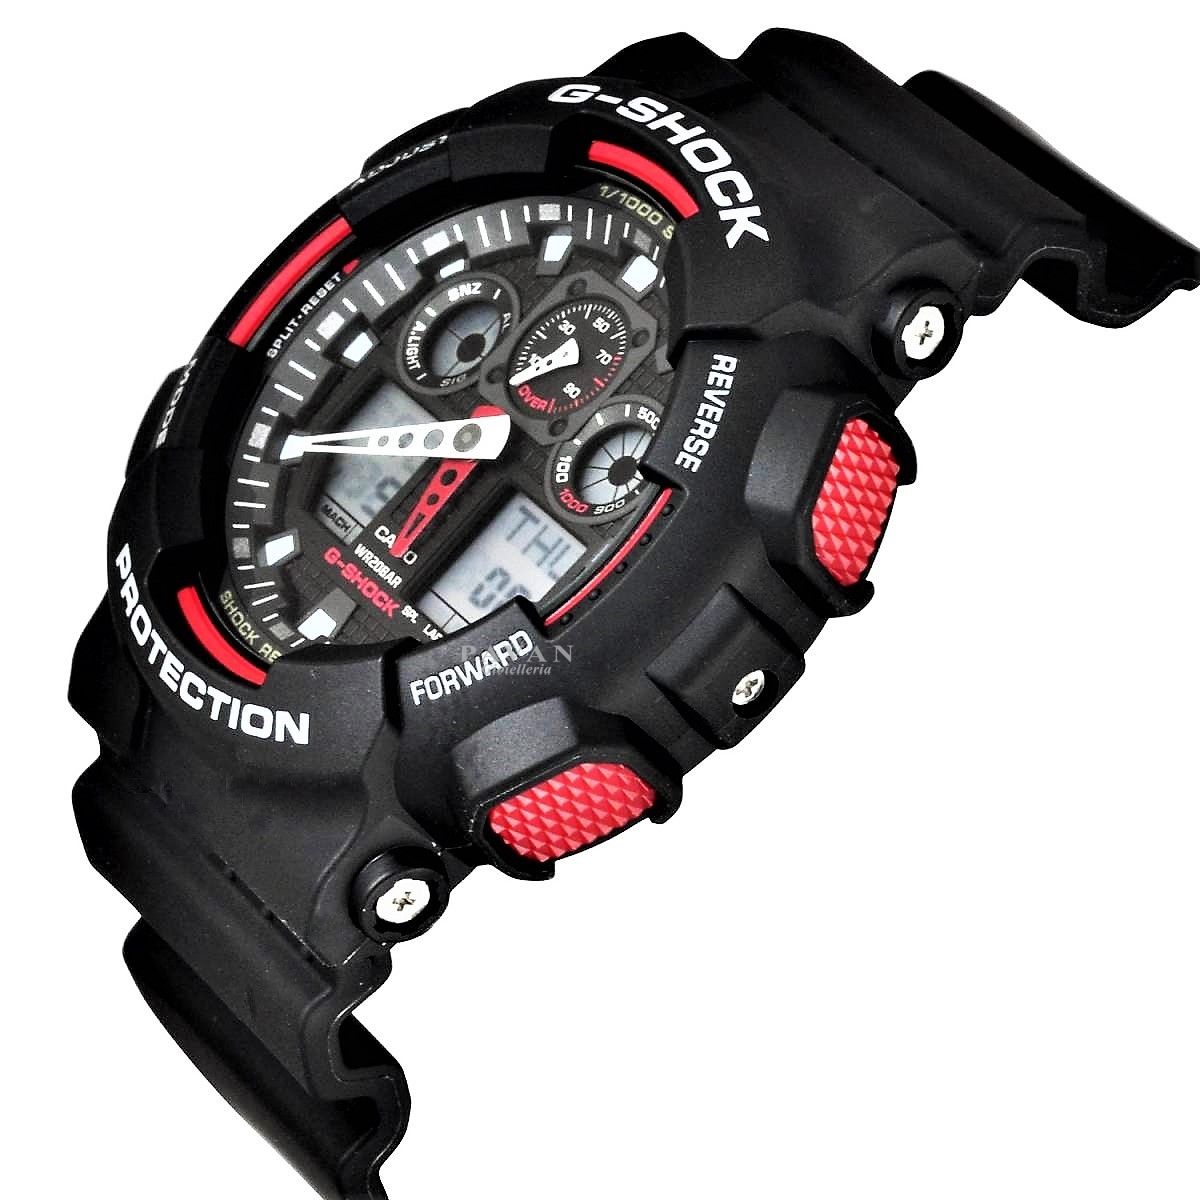 This Casio G-shock Analogue-Digital Watch for Men is the perfect timepiece to wear or to gift. It's Black 51 mm Round case combined with the comfortable Black Plastic will ensure you enjoy this stunning timepiece without any compromise. Operated by a high quality Quartz movement and water resistant to 20 bars, your watch will keep ticking. Precision, comfort, convenience - a good watch will give it all to you - perfect gift for any occasion -The watch has a calendar function: Day-Date-Month, G-SHOCK, World Time, Stopwatch, Countdown, Alarm High quality 21 cm length and 22 mm width Black Resin strap with a Buckle Case diameter: 51 mm,case thickness: 14 mm, case colour: Black and dial colour: Black